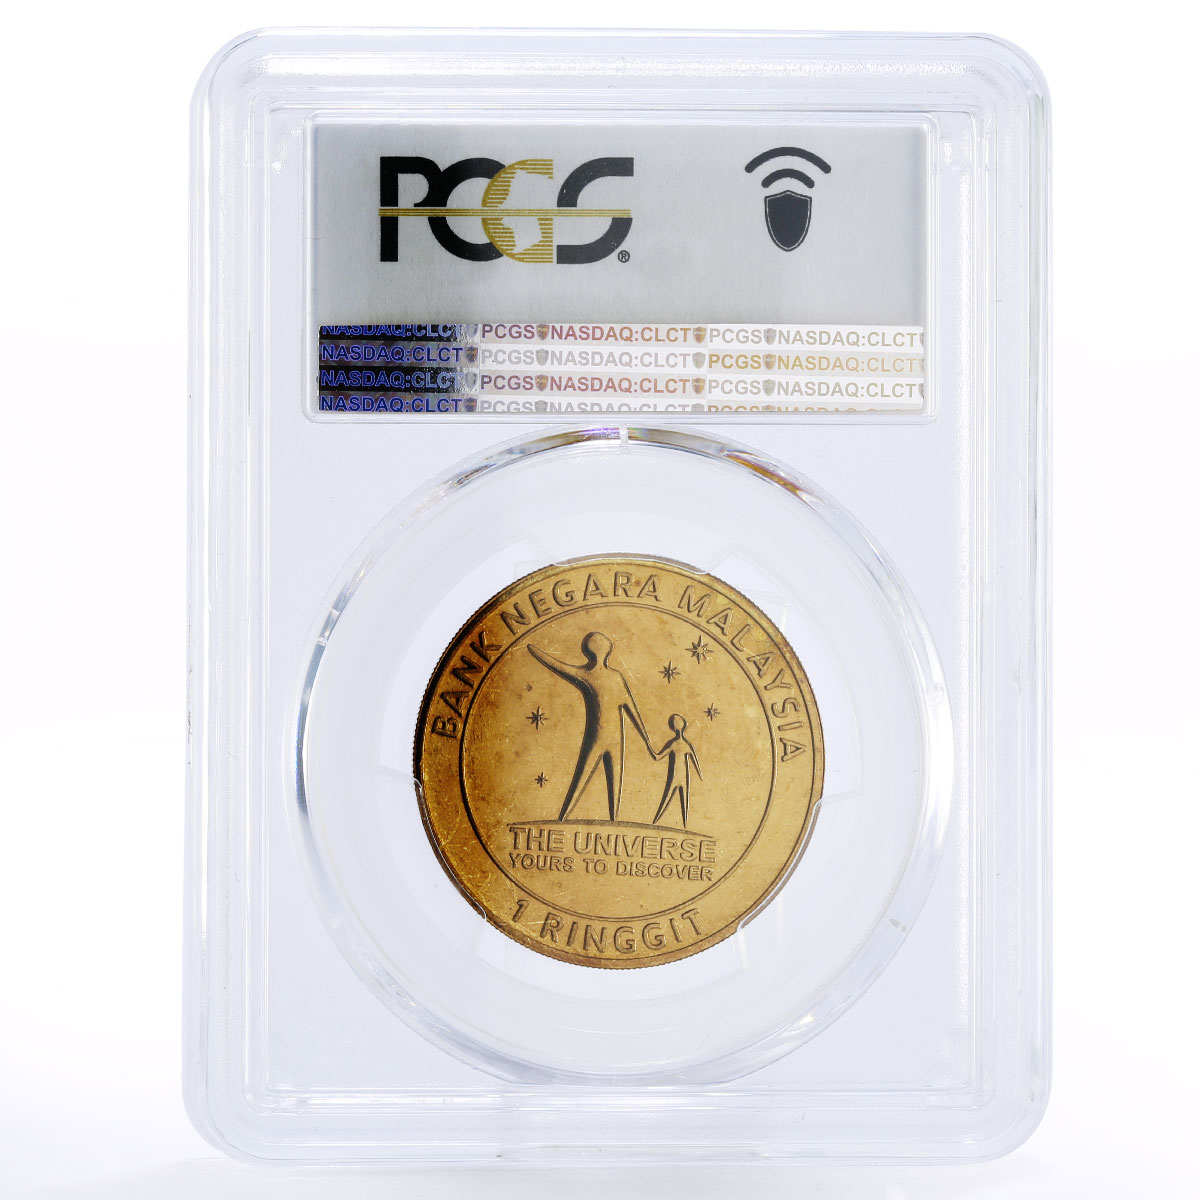 Malaysia 1 ringgit Year of Astronomy Space Orbit MS68 PCGS gold coin 2009